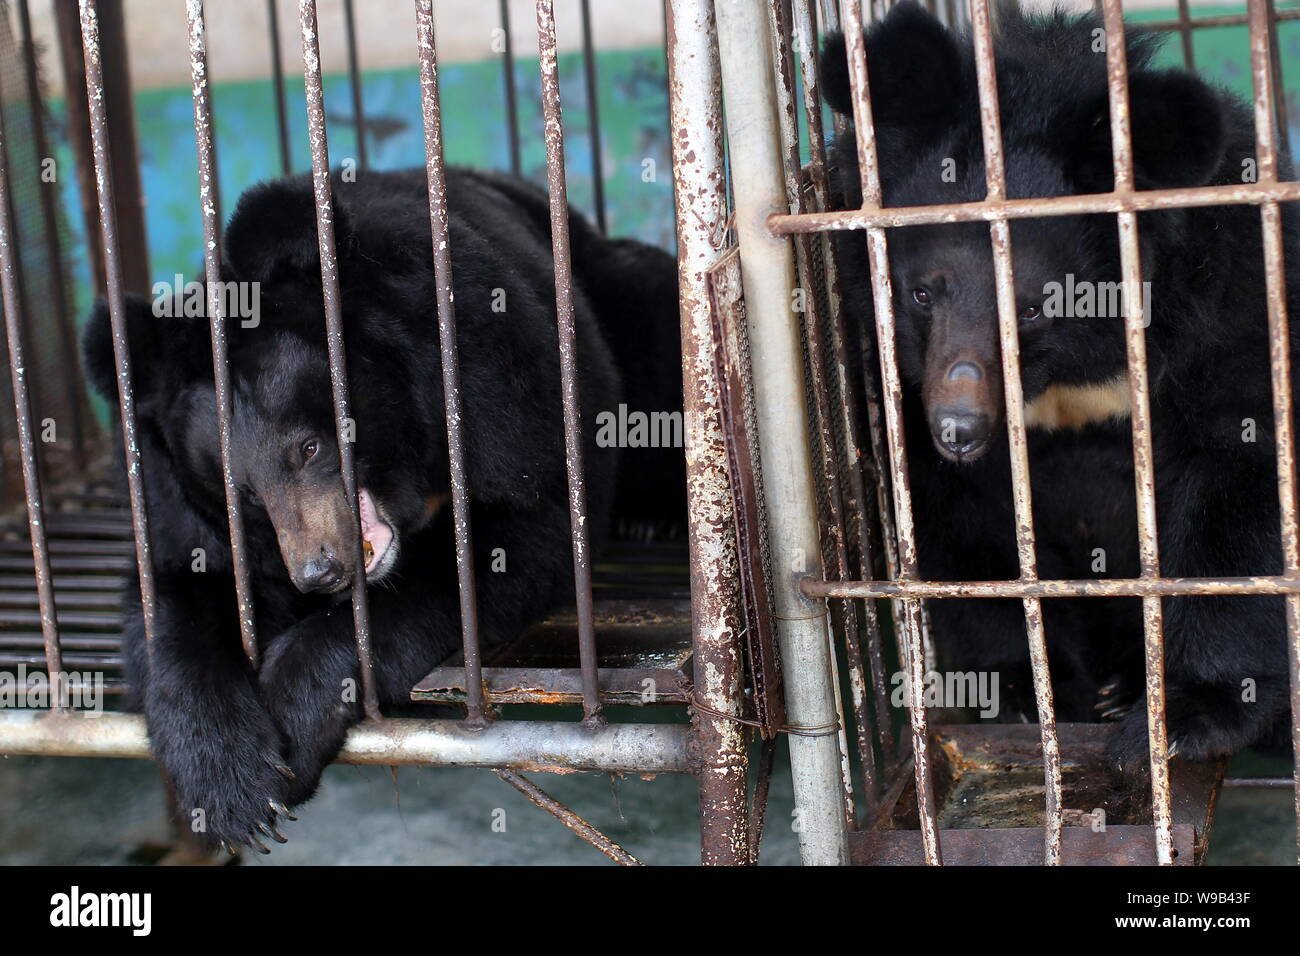 Two bears are kept in the cages at a bear bile farm in Weihai city, east Chinas Shandong province, 19 April 2010.   Jill Robinson, the founder of the Stock Photo